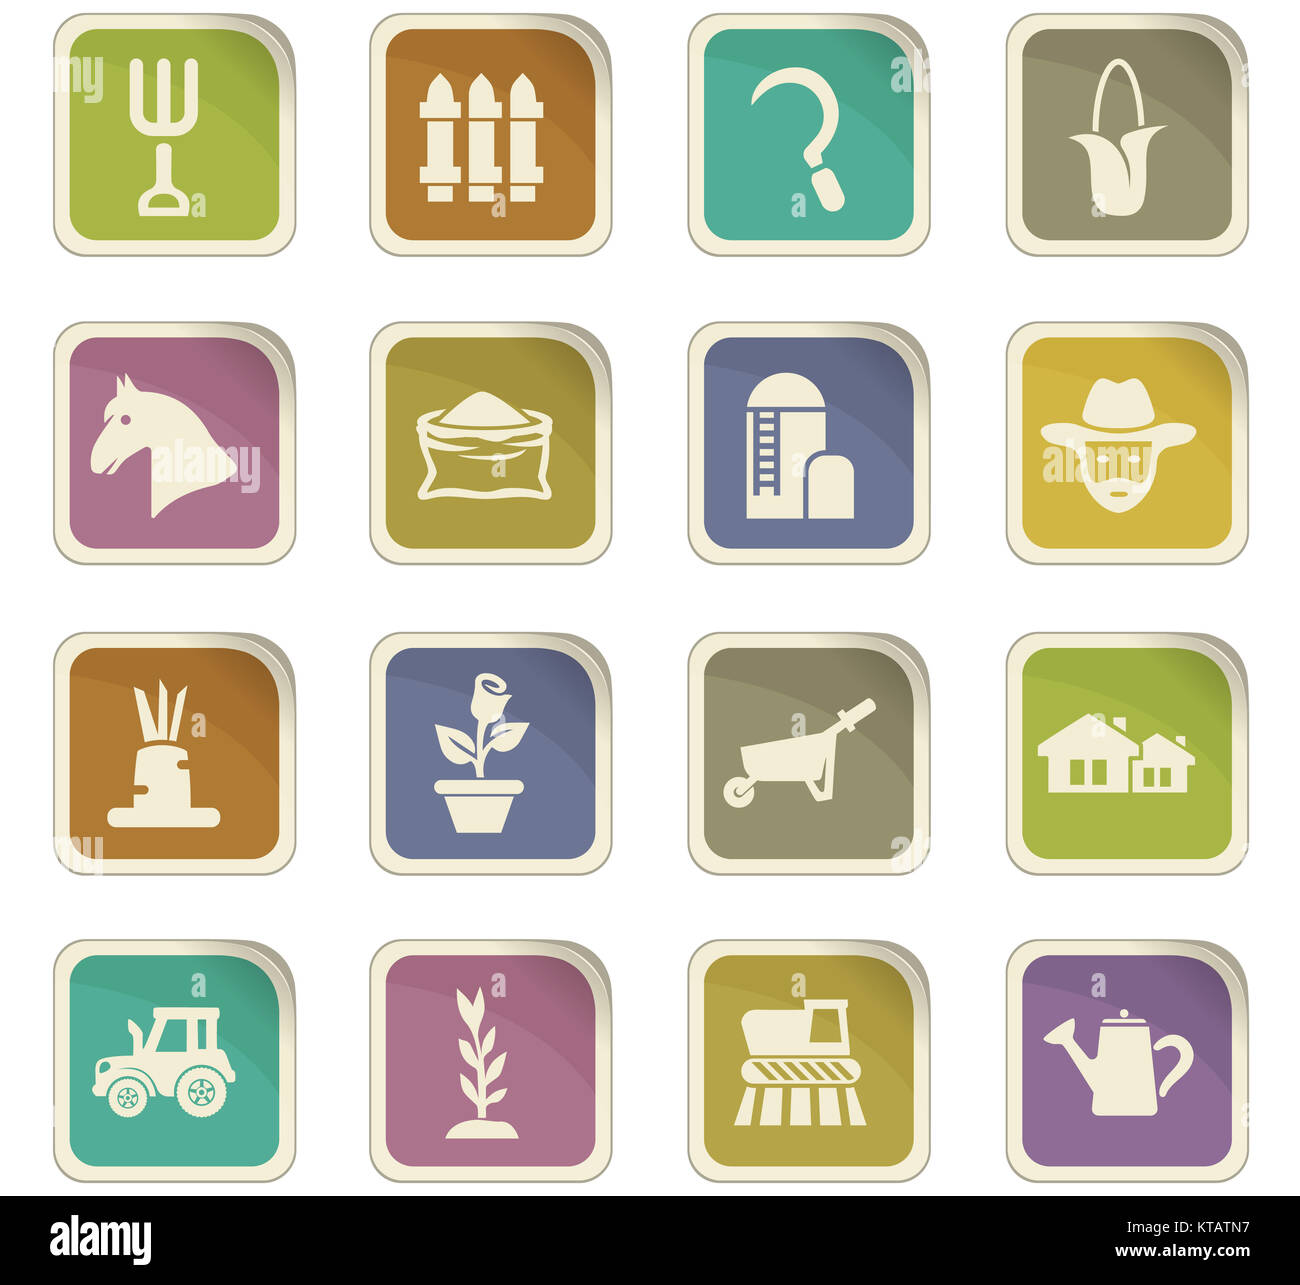 Agricultural icons set Stock Photo